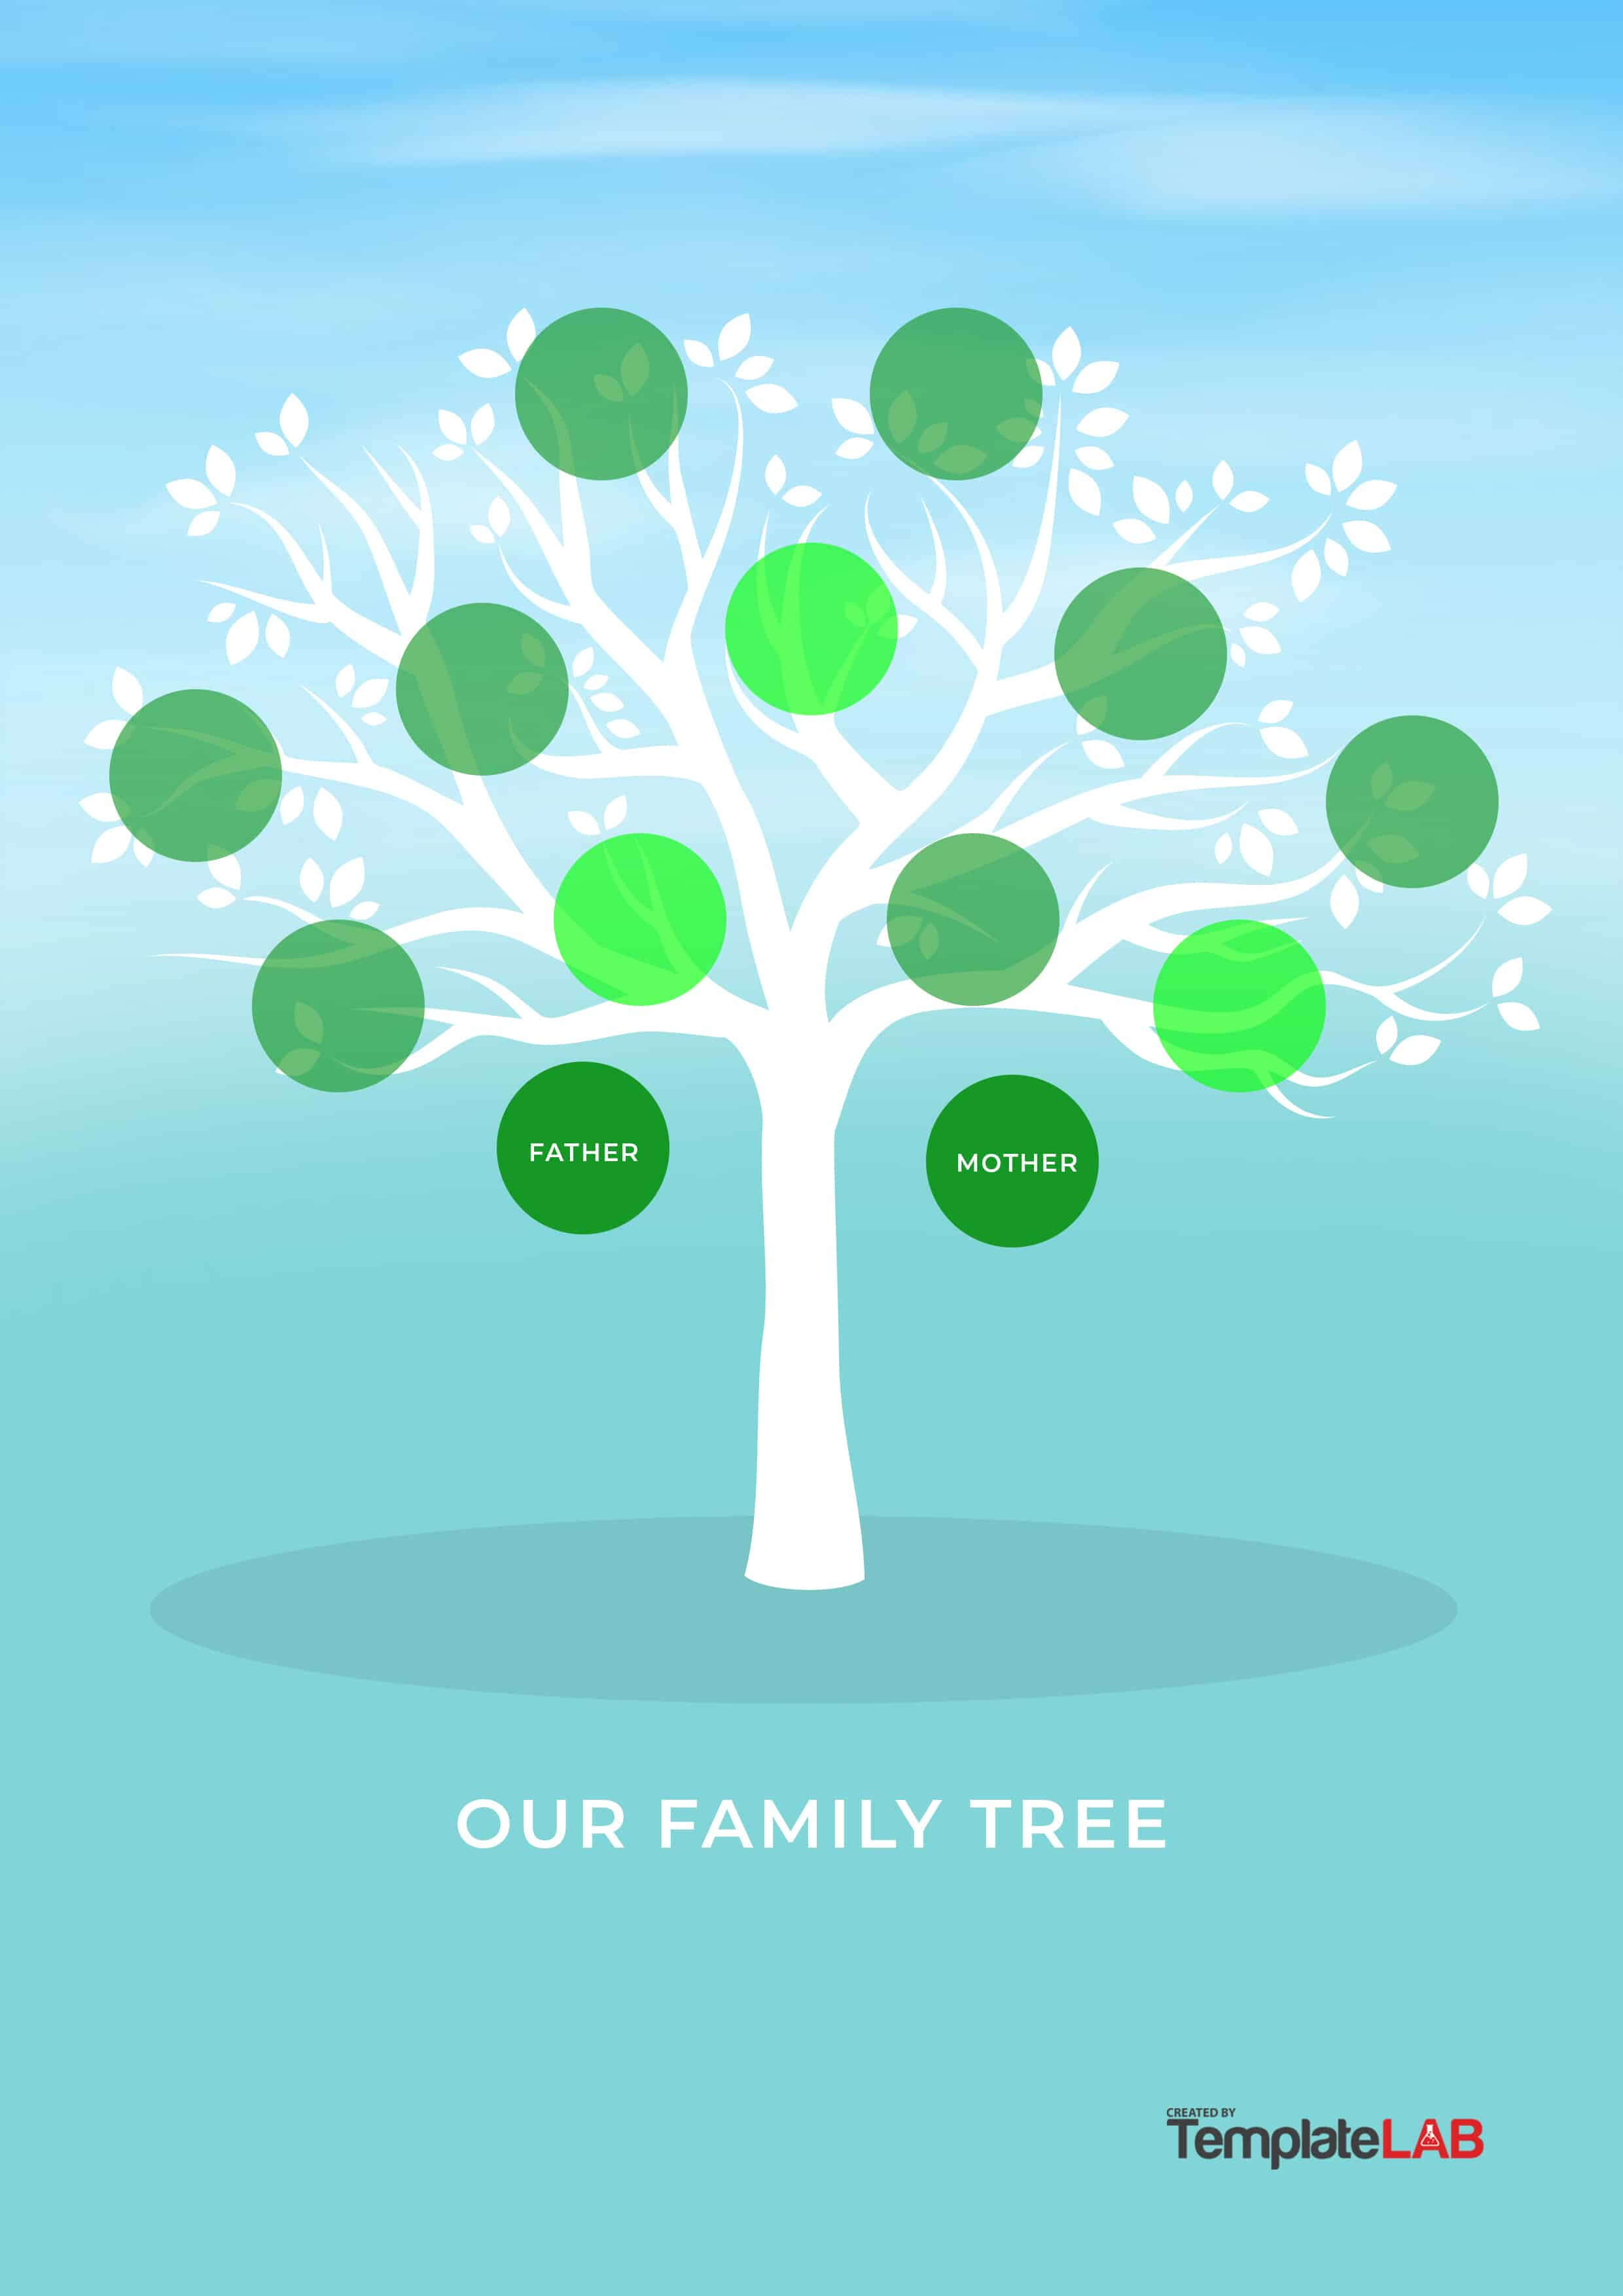 50+ Free Family Tree Templates (Word, Excel, Pdf) ᐅ Intended For 3 Generation Family Tree Template Word